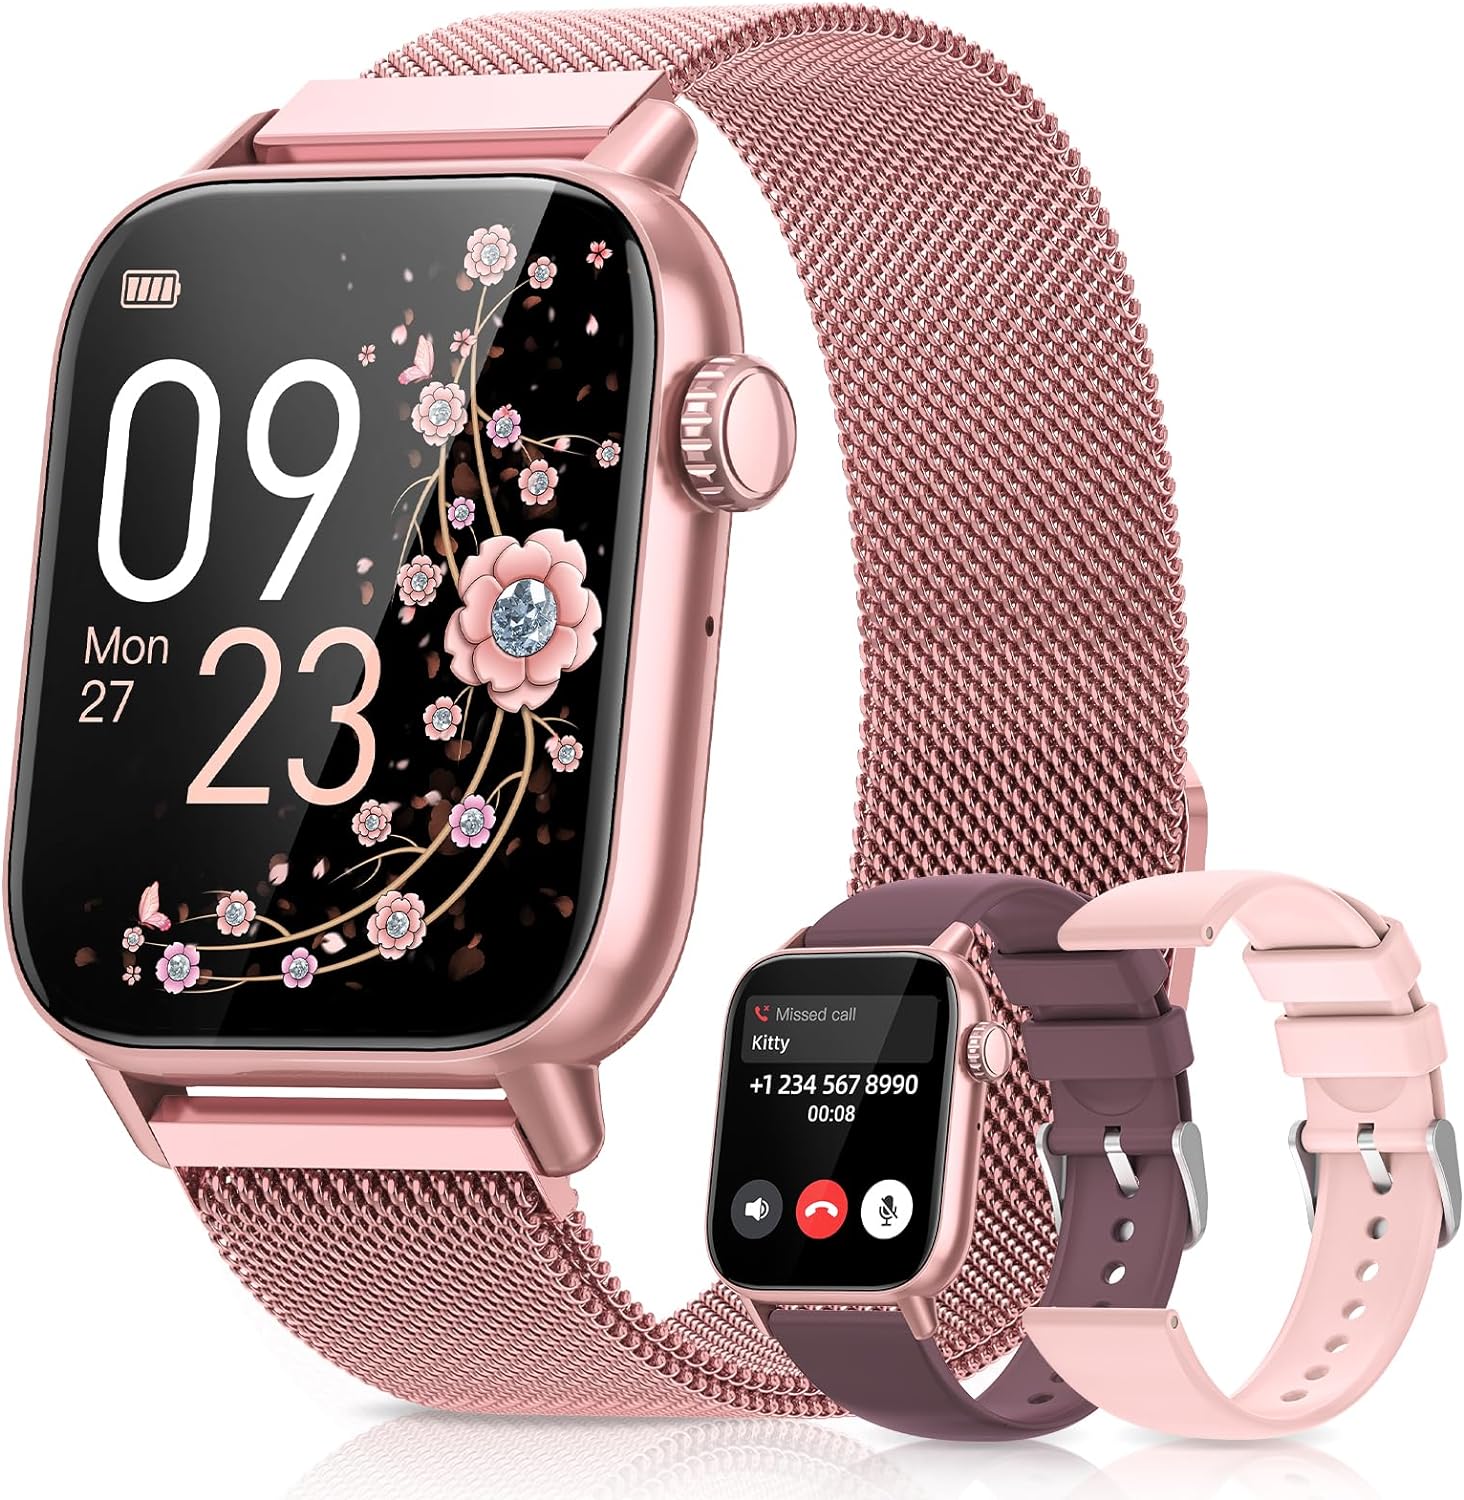 BANLVS Womens Smartwatch with Phone Function, 1.85 Inch Fitness Watch with SpO2, Heart Rate, Sleep Monitor, Menstrual Cycle, IP68 Waterproof Sports Watch for iOS and Android (Pink)